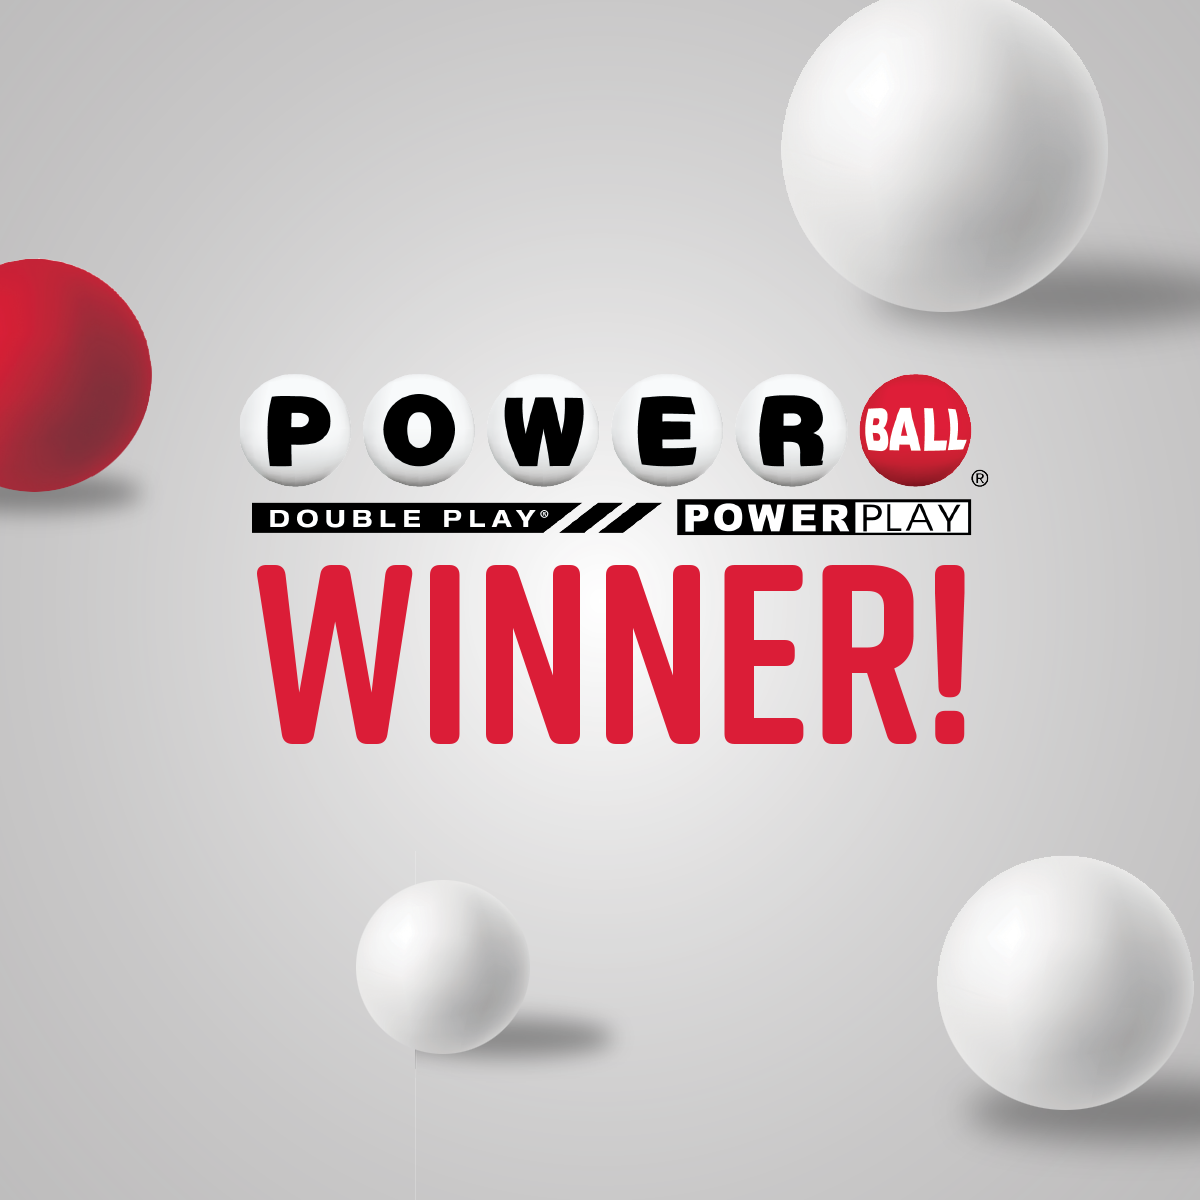 $1 Million Winning Powerball® Ticket Sold in Highland for Saturday's Drawing